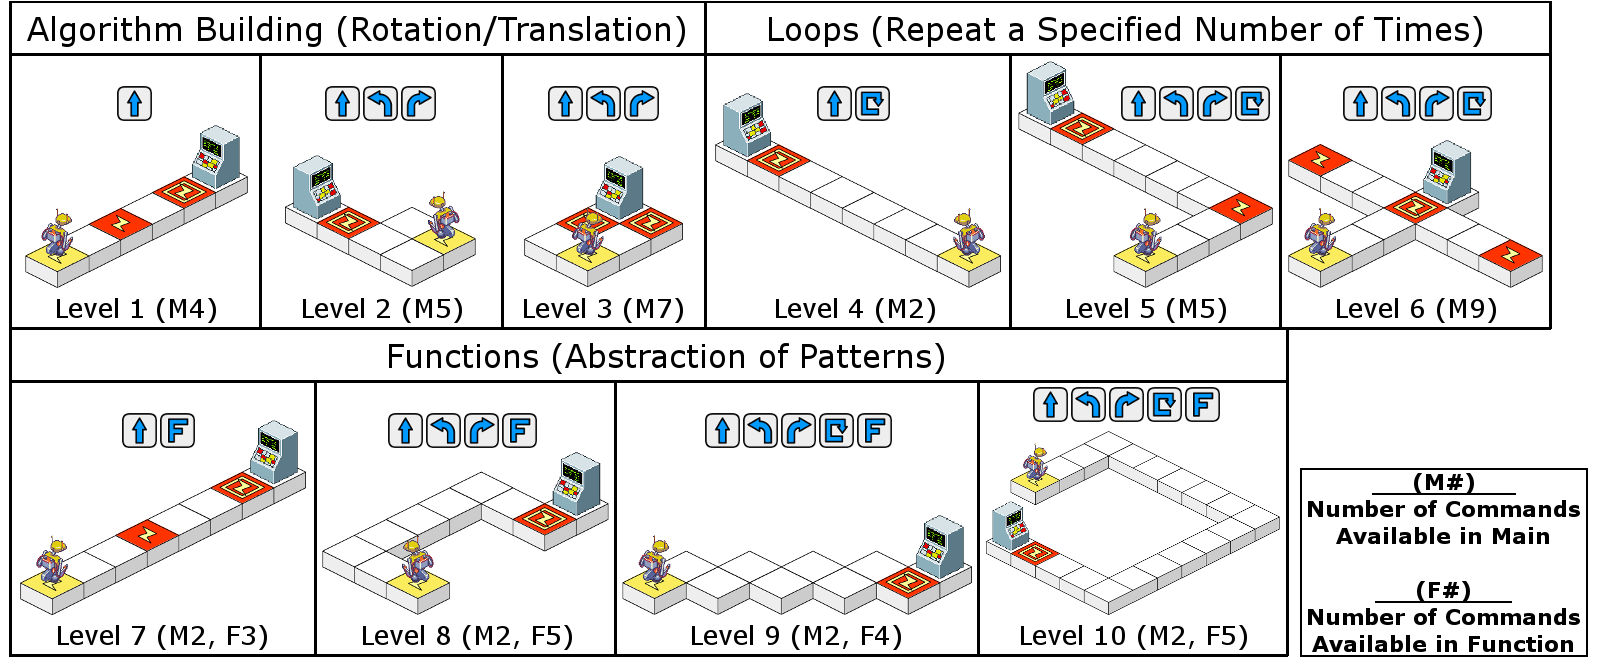 The 10 Levels of Bots & (Main)Frames Utilized in Studies